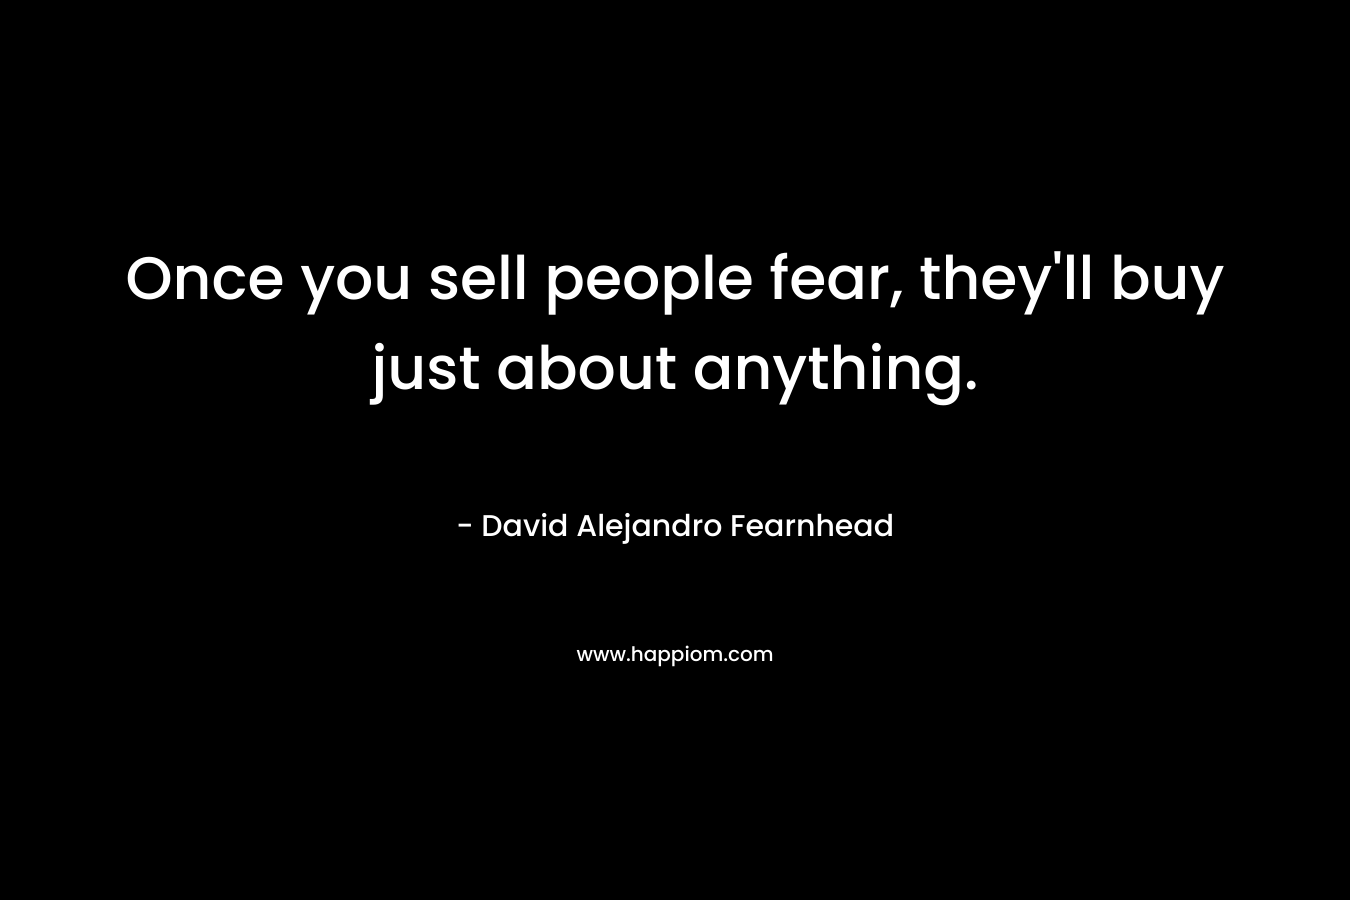 Once you sell people fear, they'll buy just about anything.